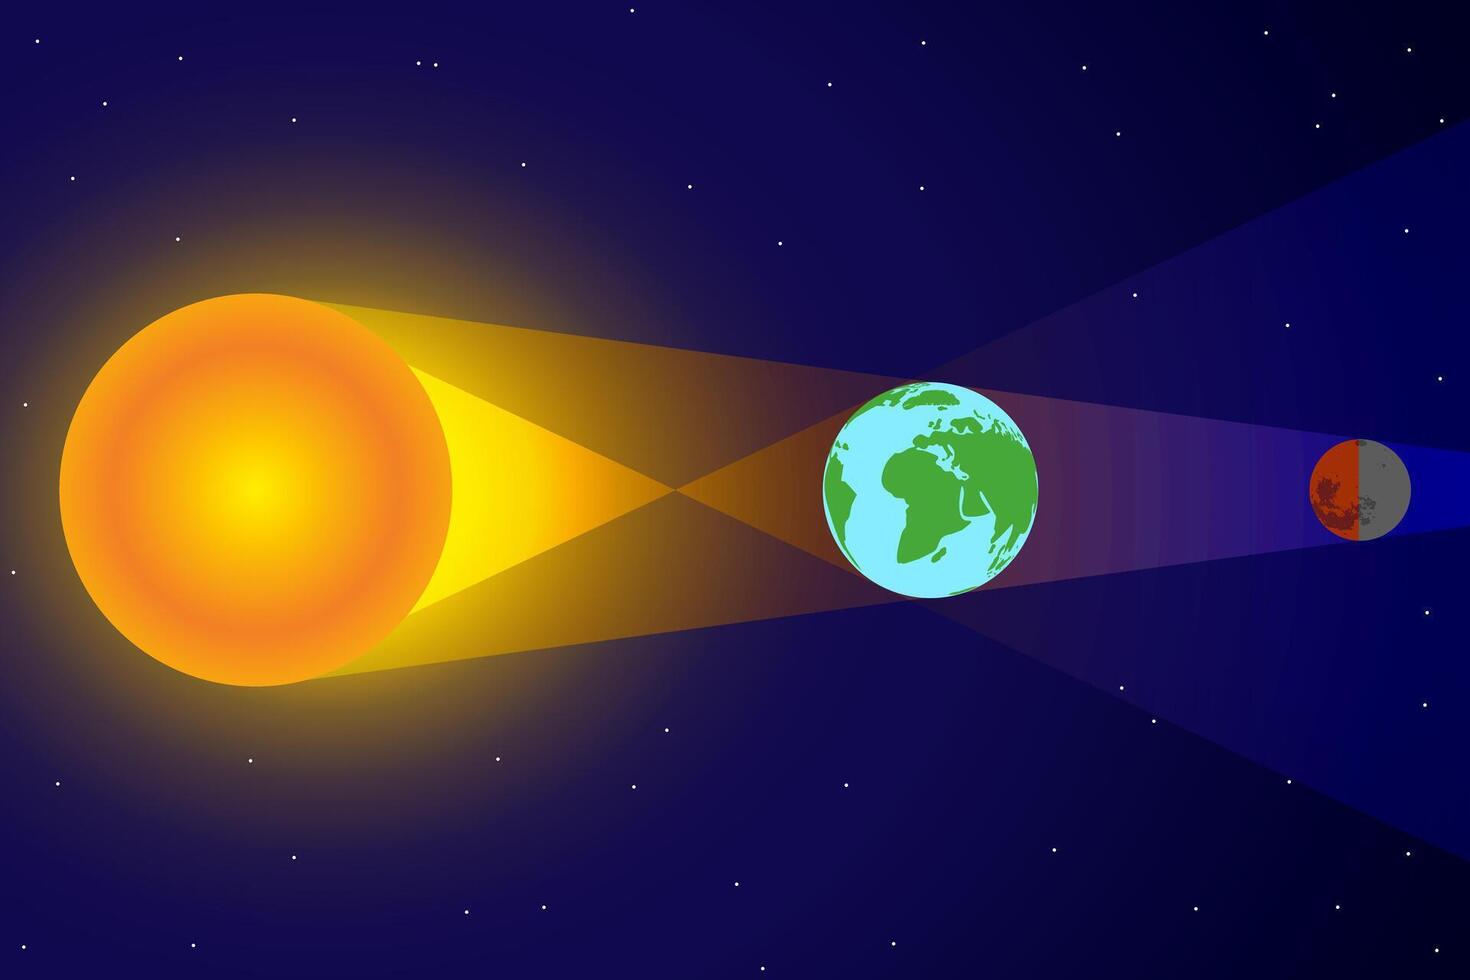 Lunar Eclipse Blood Moon Illustration Chart with Space, Sun and Earth vector